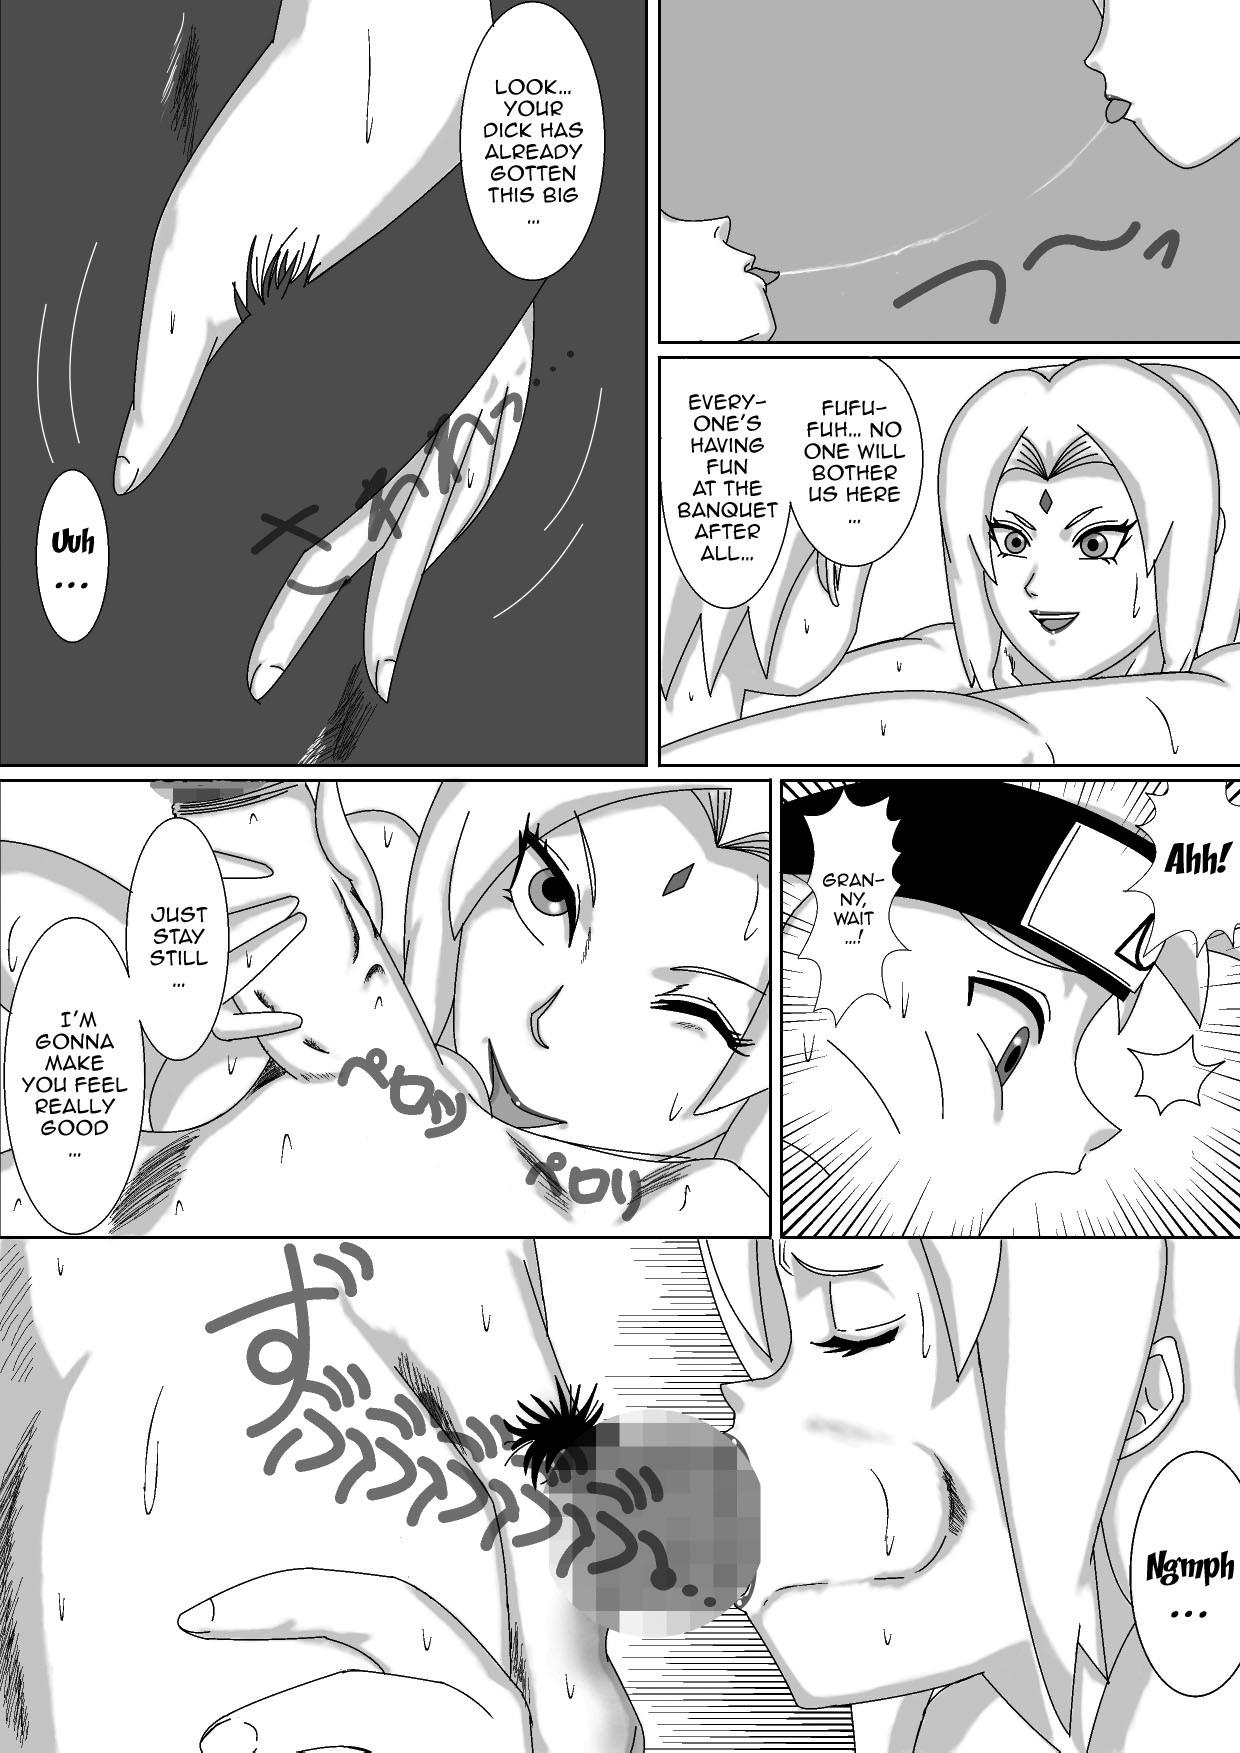 Long Hair Nomisugite Deisui Shita BBA to Yarimakutta Ken!! | The Case Of Having Sex With This Old Lady After She Got Herself Really Drunk - Naruto Ssbbw - Page 7